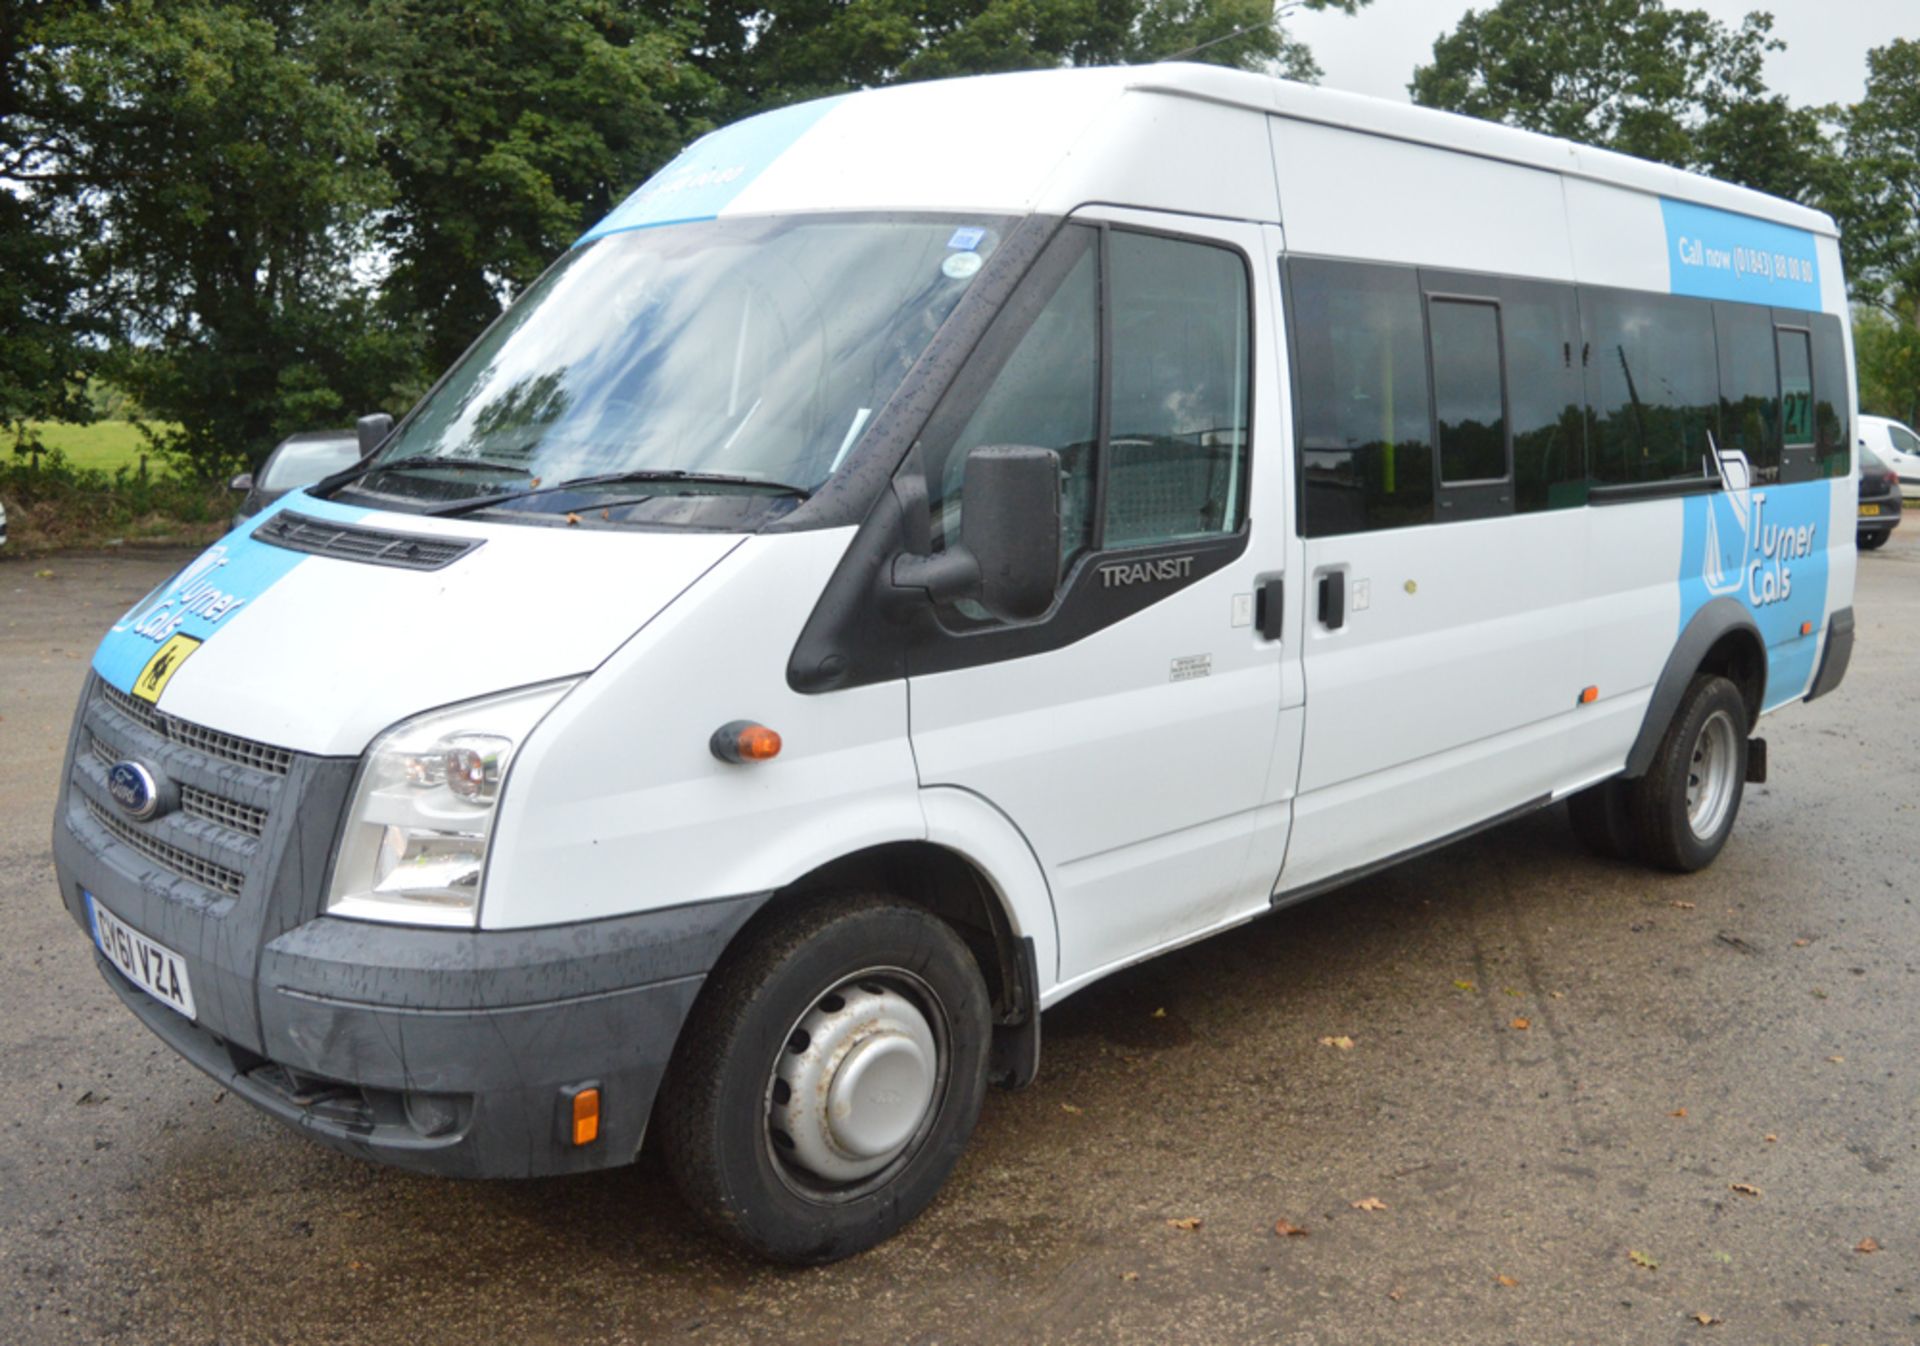 Ford Transit 135 T430 RWD 9 seat minibus Registration Number: GY61 VZA Date of Registration: 30/ - Image 4 of 12